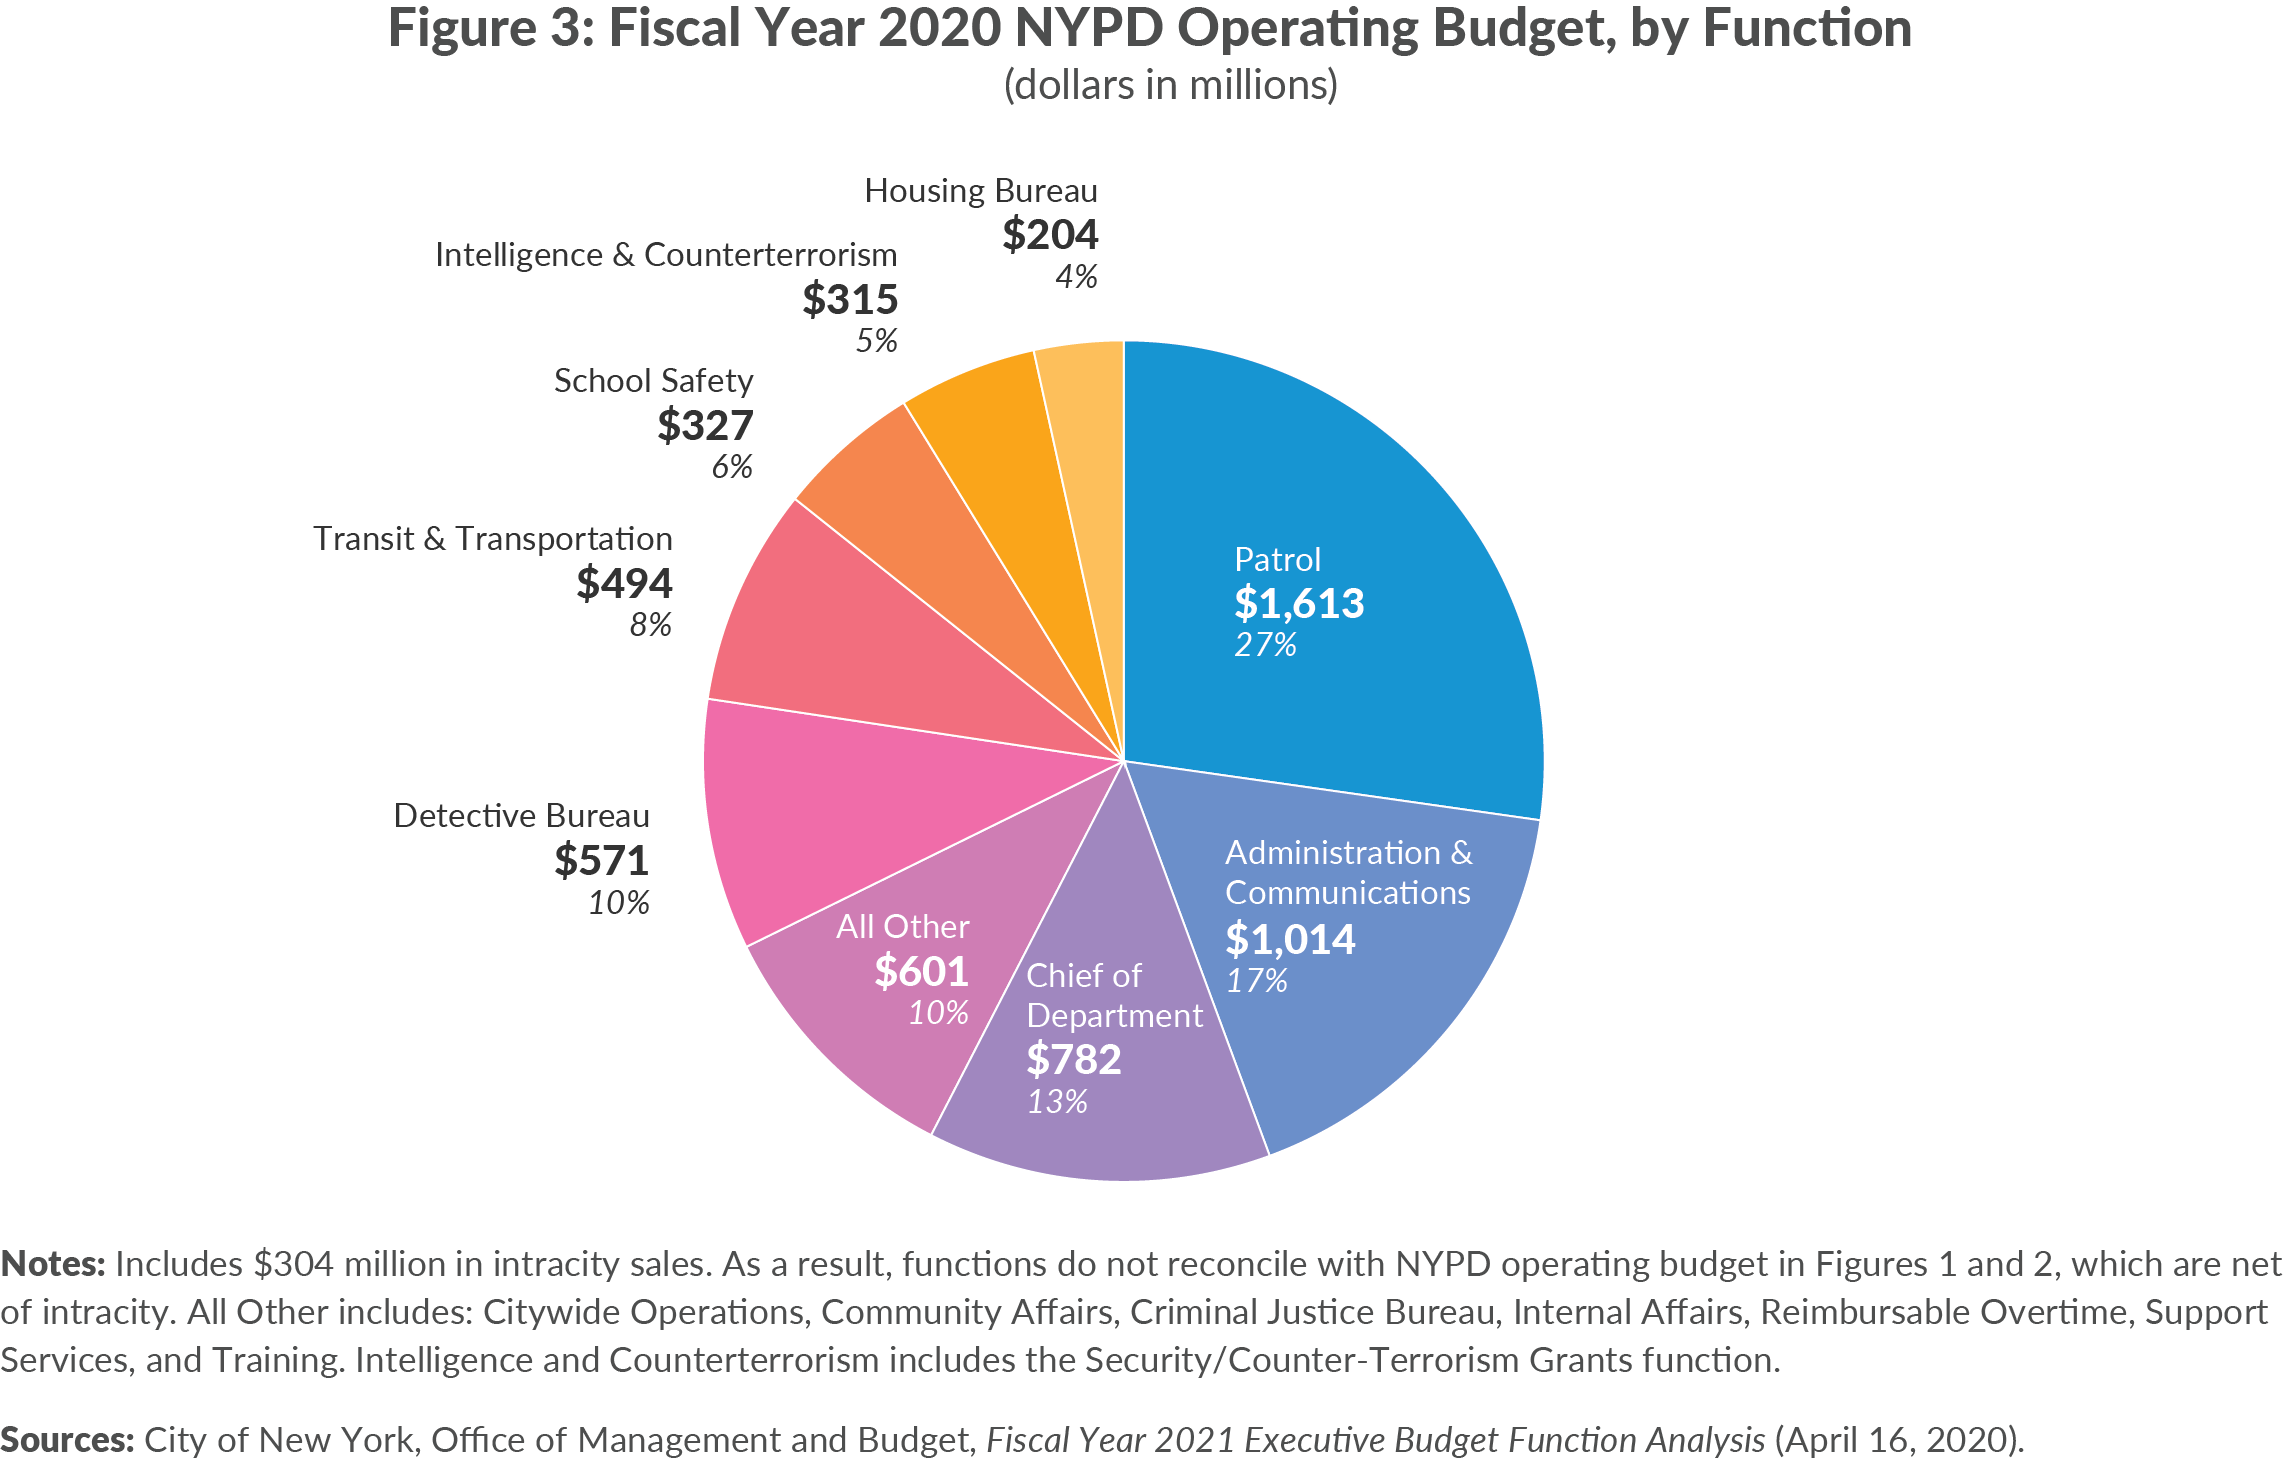 Figure 3. Fiscal Year 2020 NYPD Operating Budget, by Function, dollars in millions